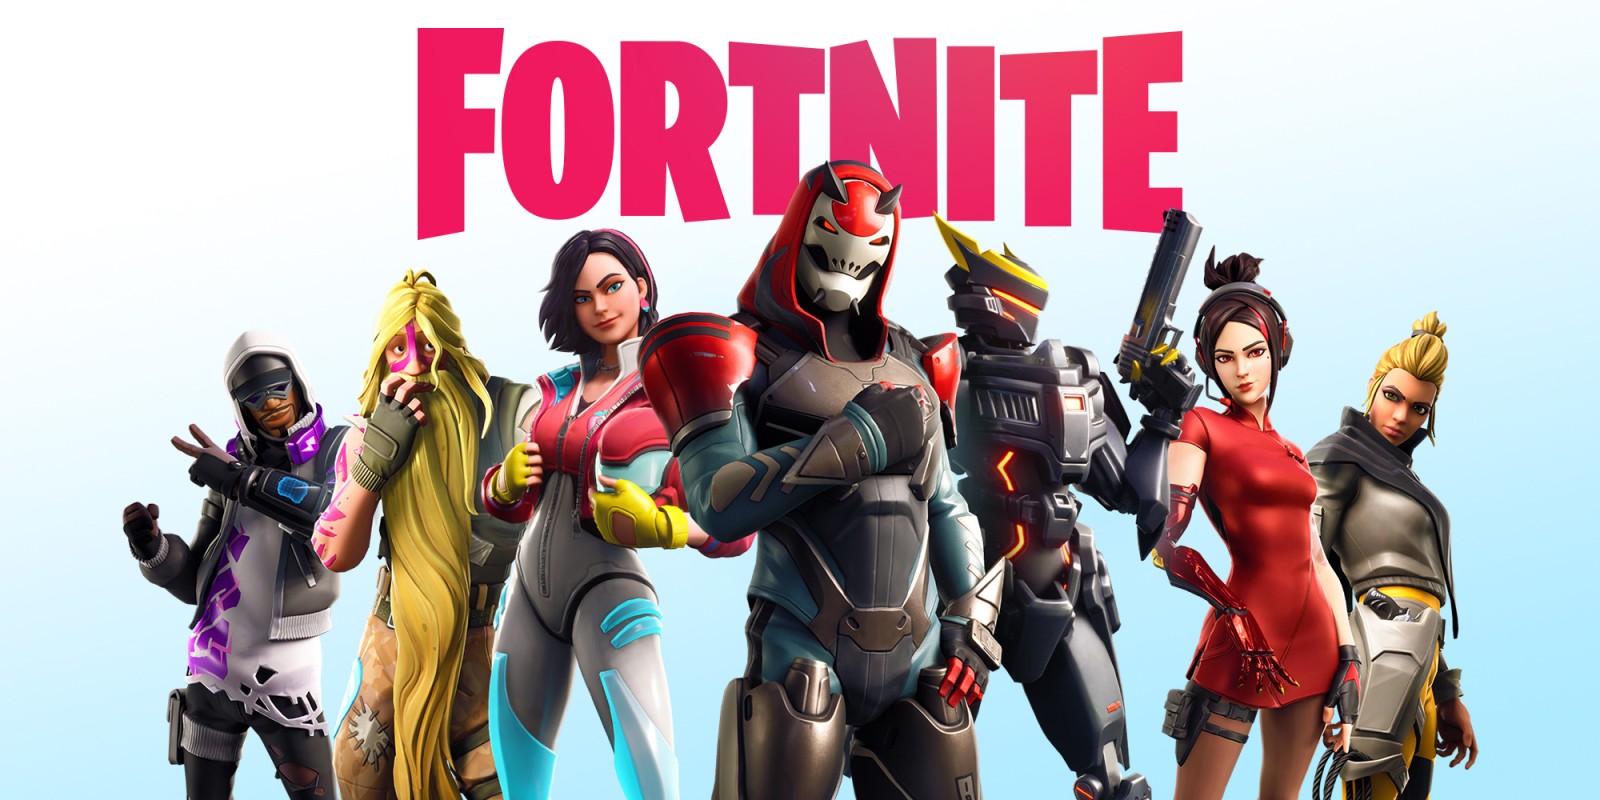 H2x1 NSwitchDS Fortnite image1600w What I am Learning from Playing Fortnite with my Daughter